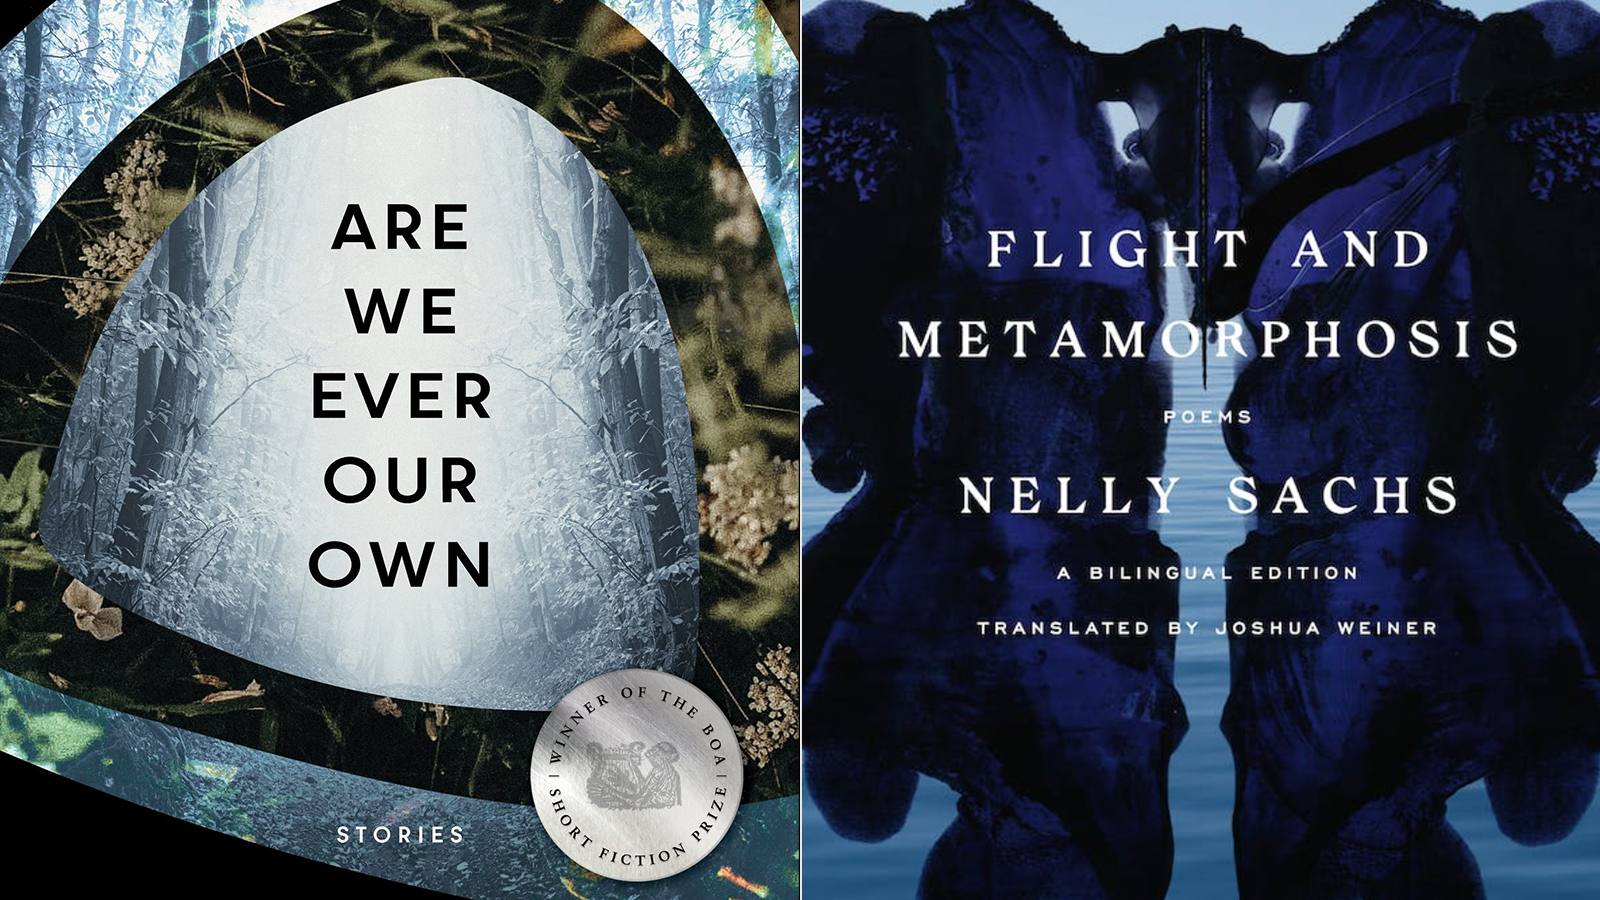 Book covers of Are We Ever Our Own and Flight and Metamorphosis